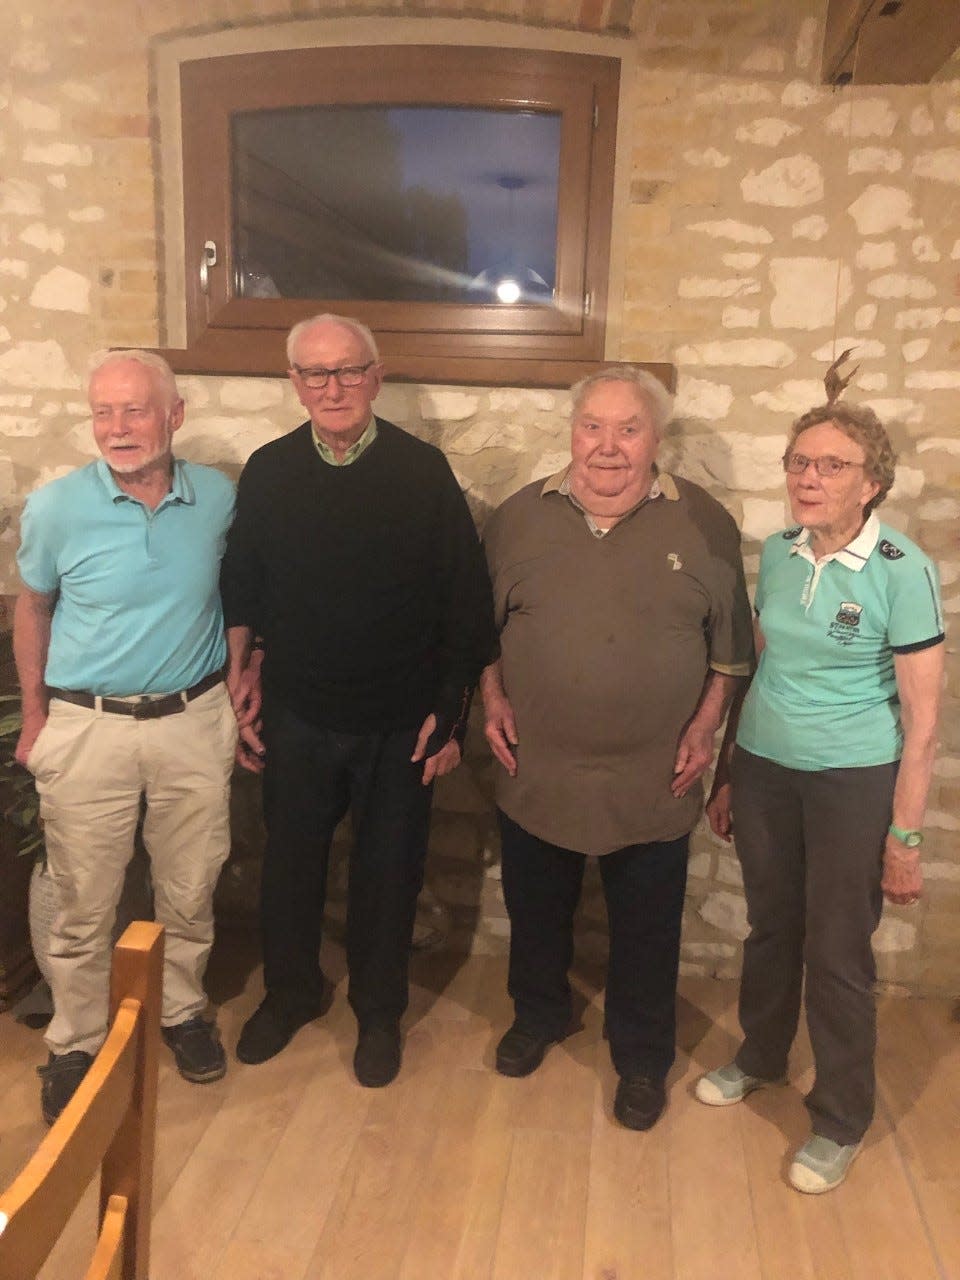 Marbaix siblings, from left: Robert Dumesnil, who was 6 in 1944 when the family hid Thomas La Grua from the Nazis; Andre Dumesnil, who was 8; Hubert Marbaix, who was born after La Grua went back to the U.S.; and  Francoise Dumesnil, who was 2 in 1944 and who later had a dress made for her with material from La Grua's parachute.